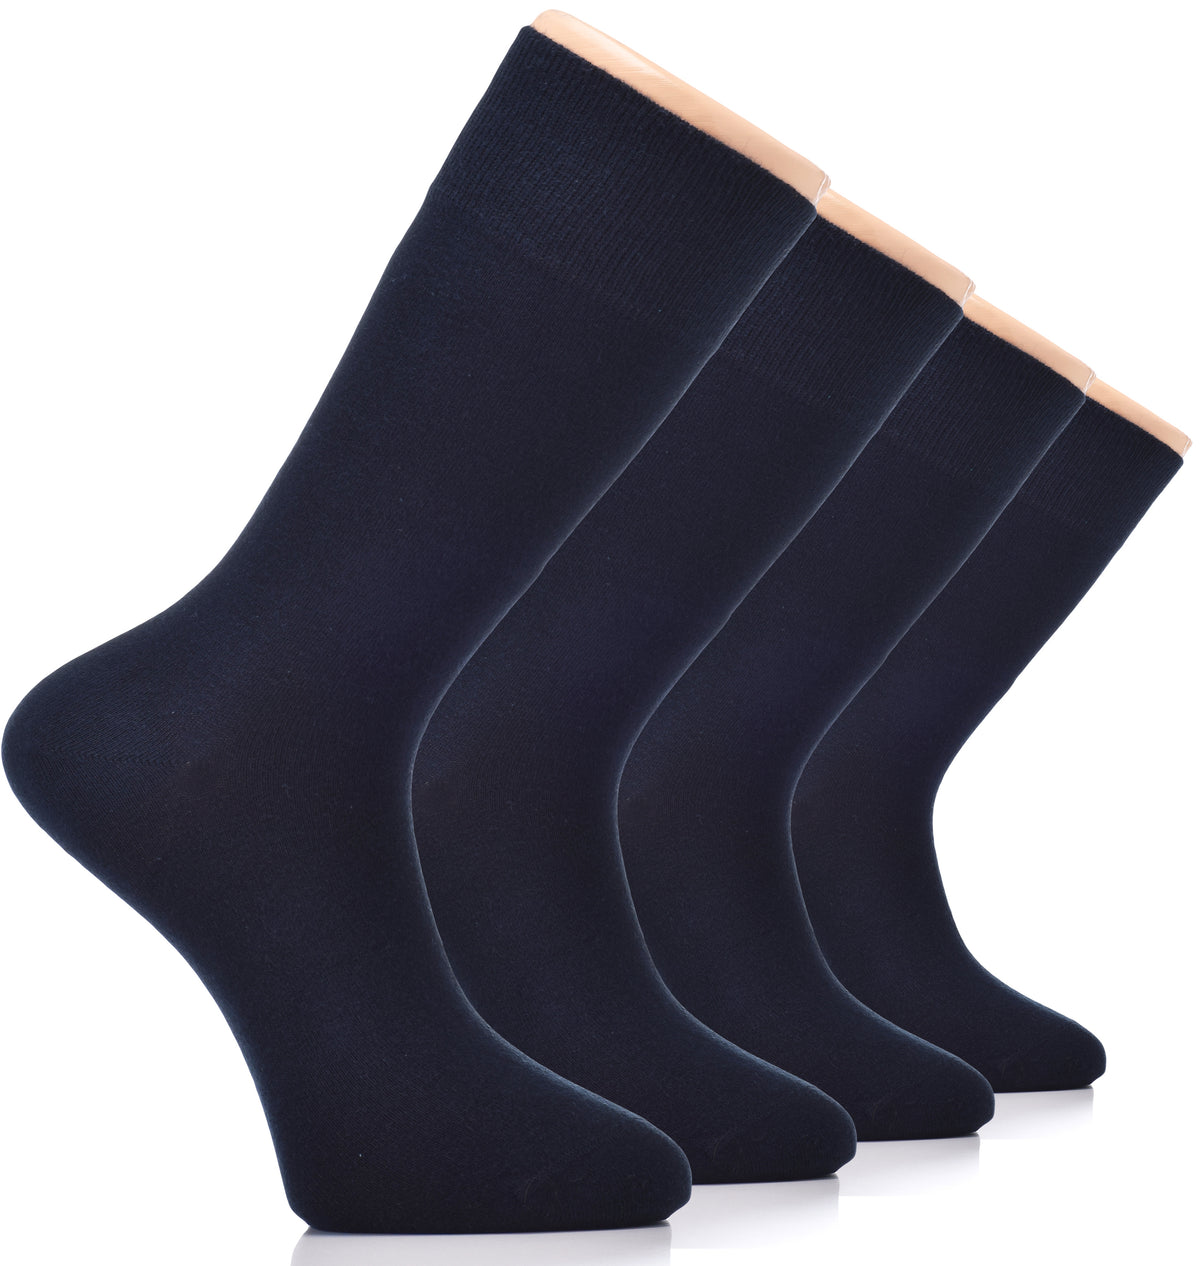 These navy blue cotton crew socks for men are a must-have. Perfect for any occasion, they offer both comfort and style.